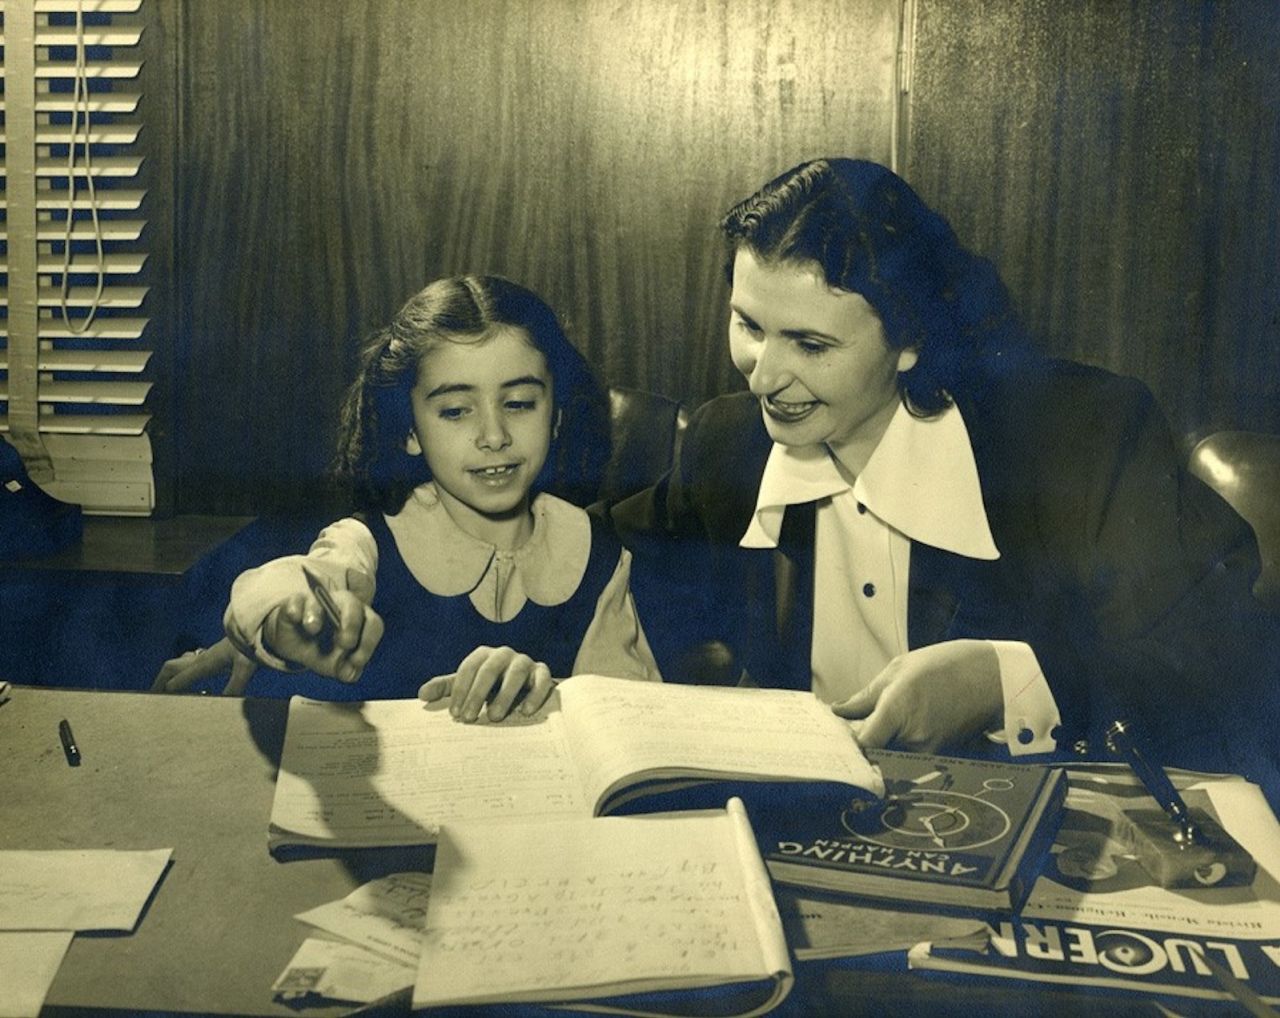 A young Pelosi is seen with her mother, Annunciata D'Alesandro. Pelosi was born in Baltimore on March 26, 1940.